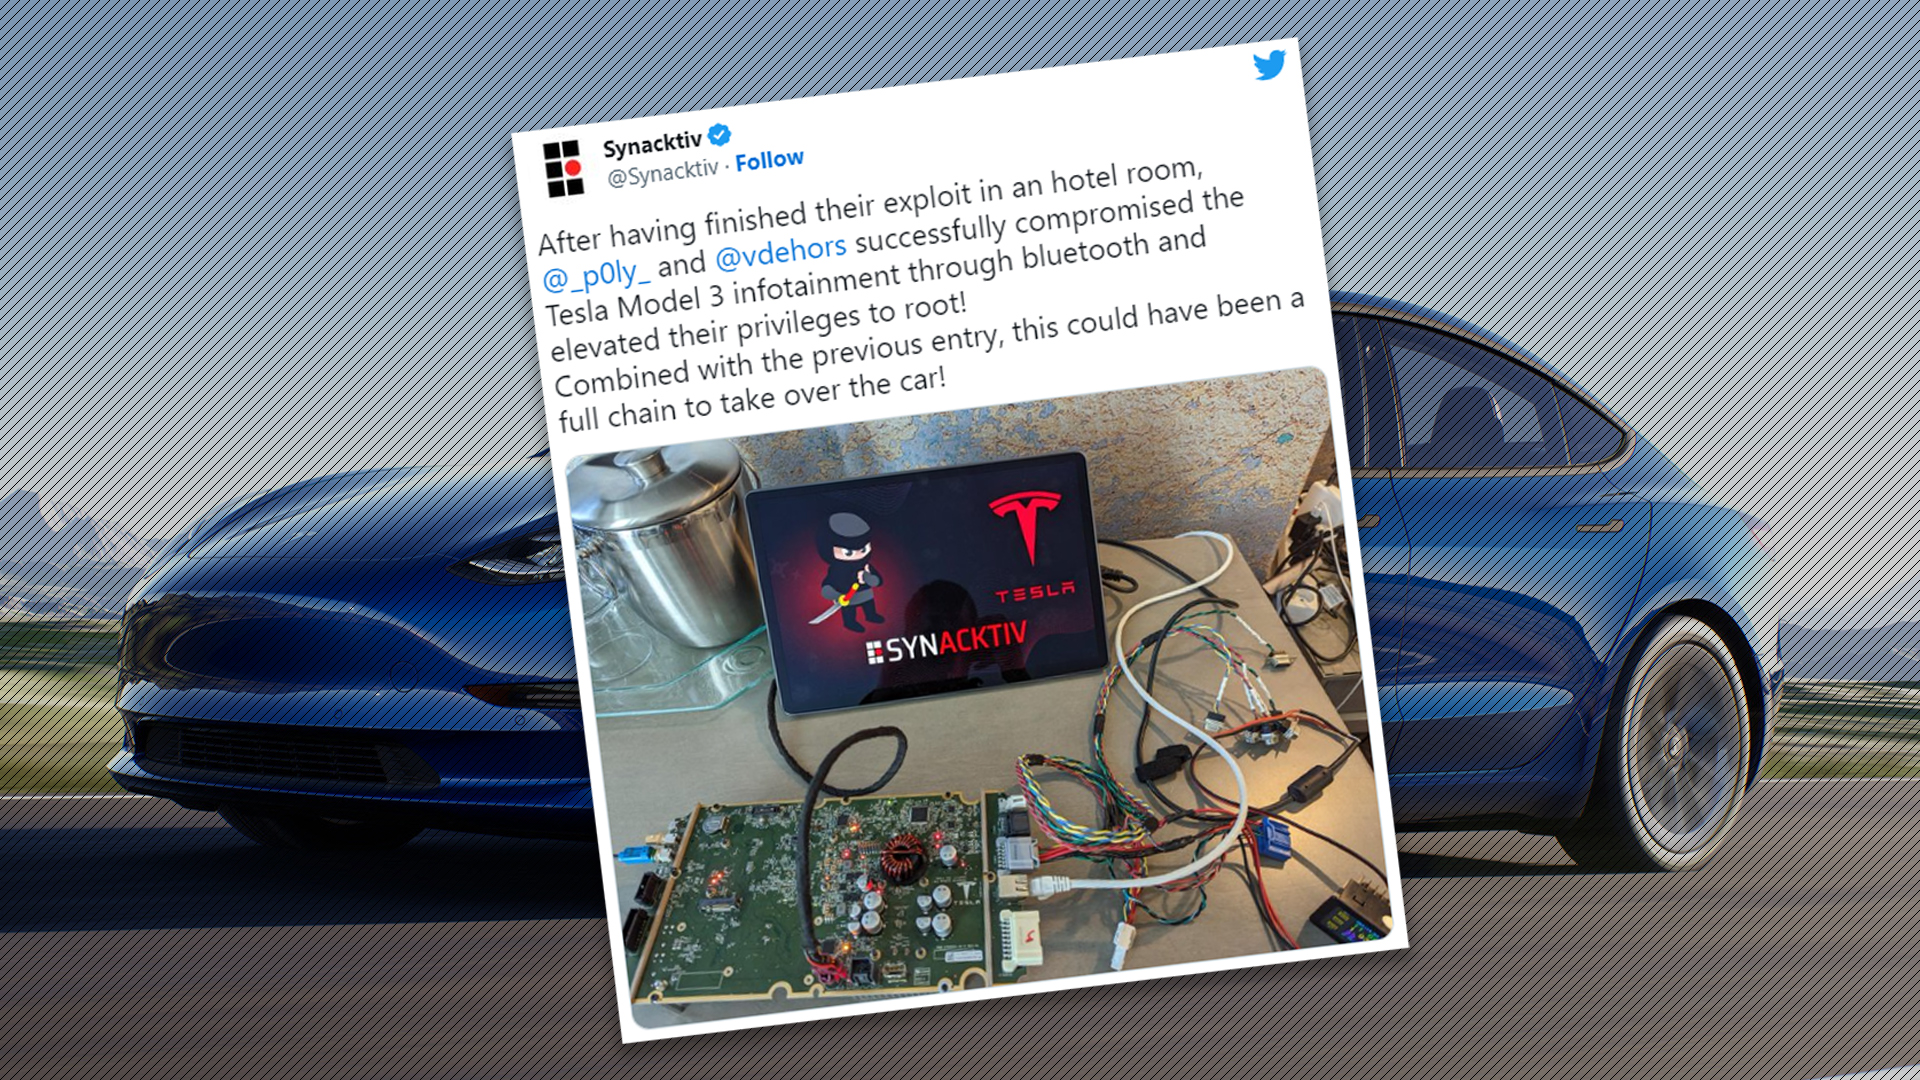 Hackers Can Steal a Tesla Model S in Seconds by Cloning Its Key